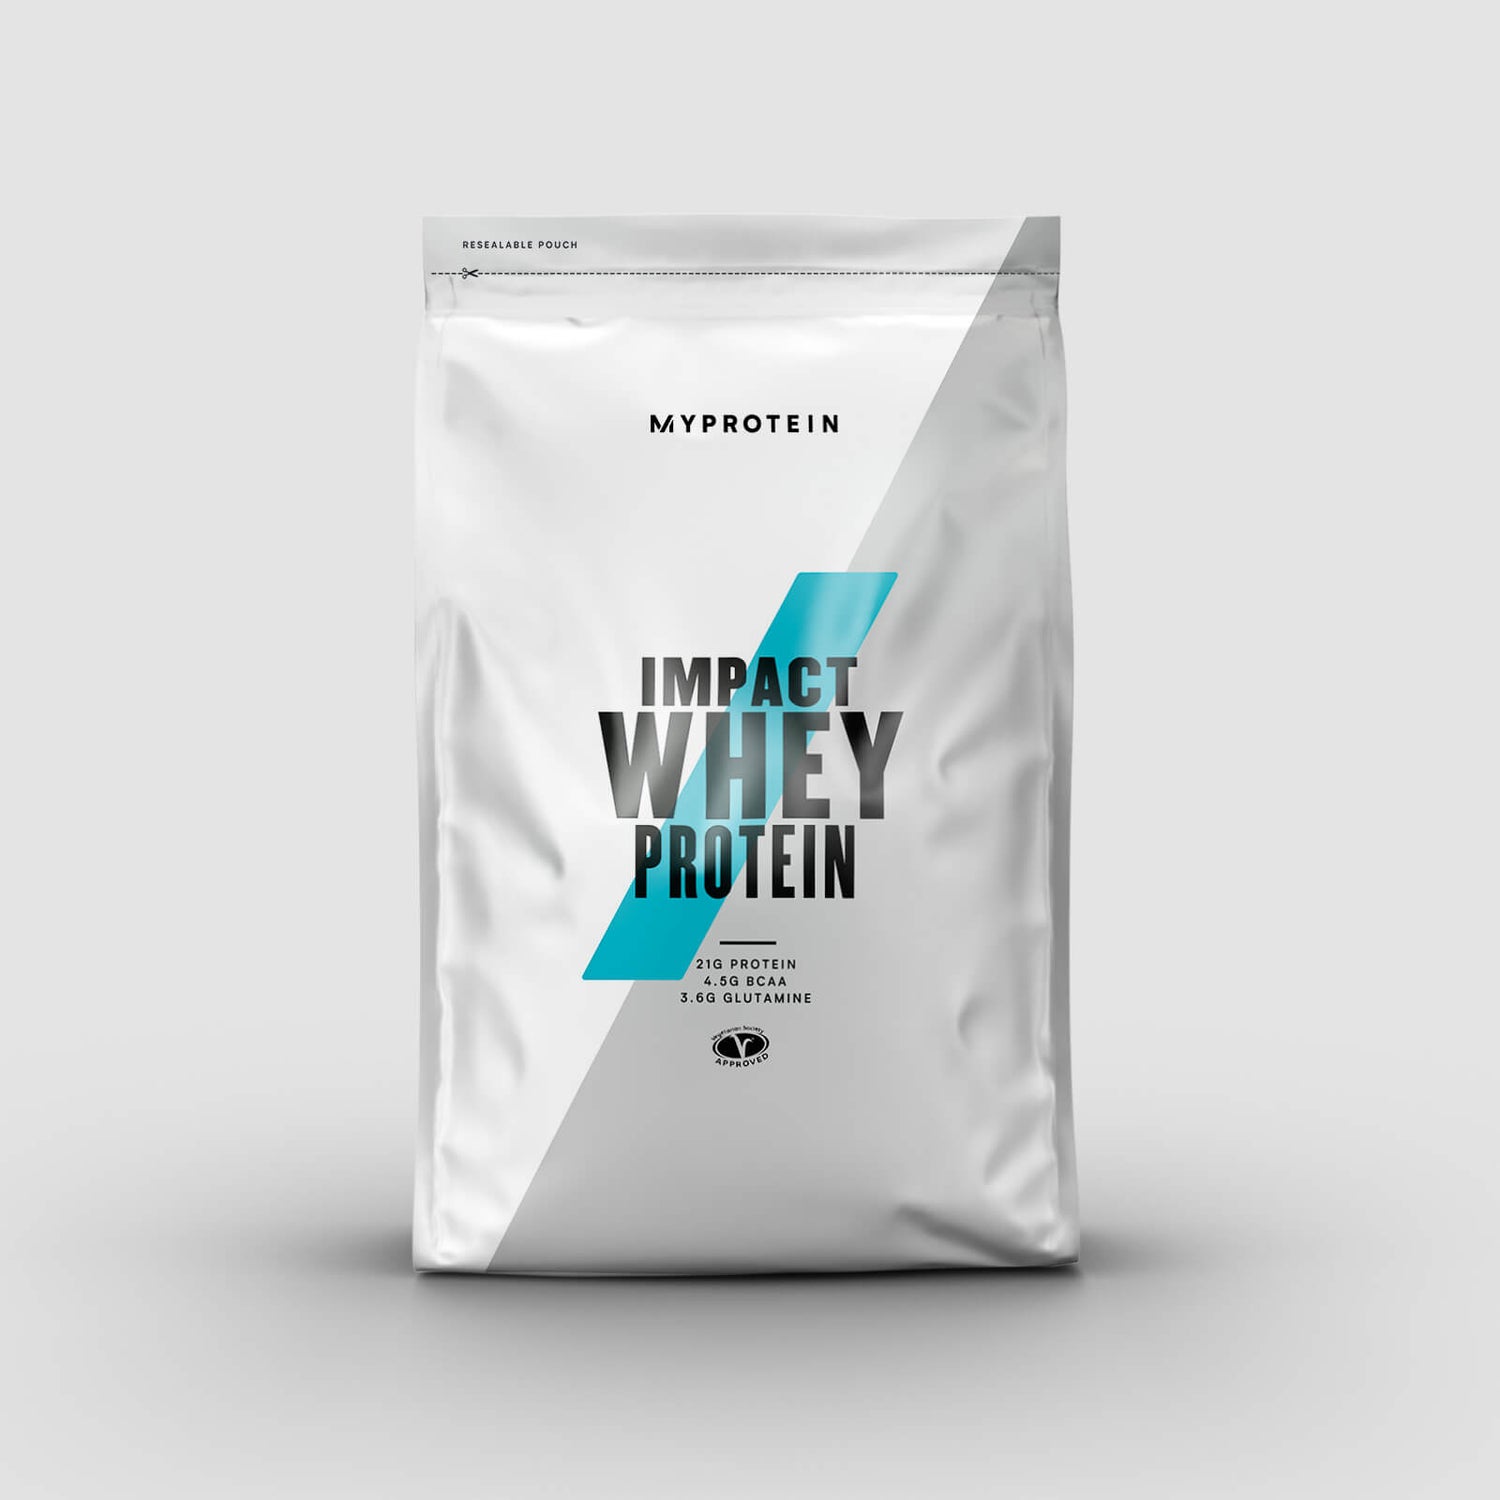 Impact Whey Protein 250g - 250g - Unflavoured